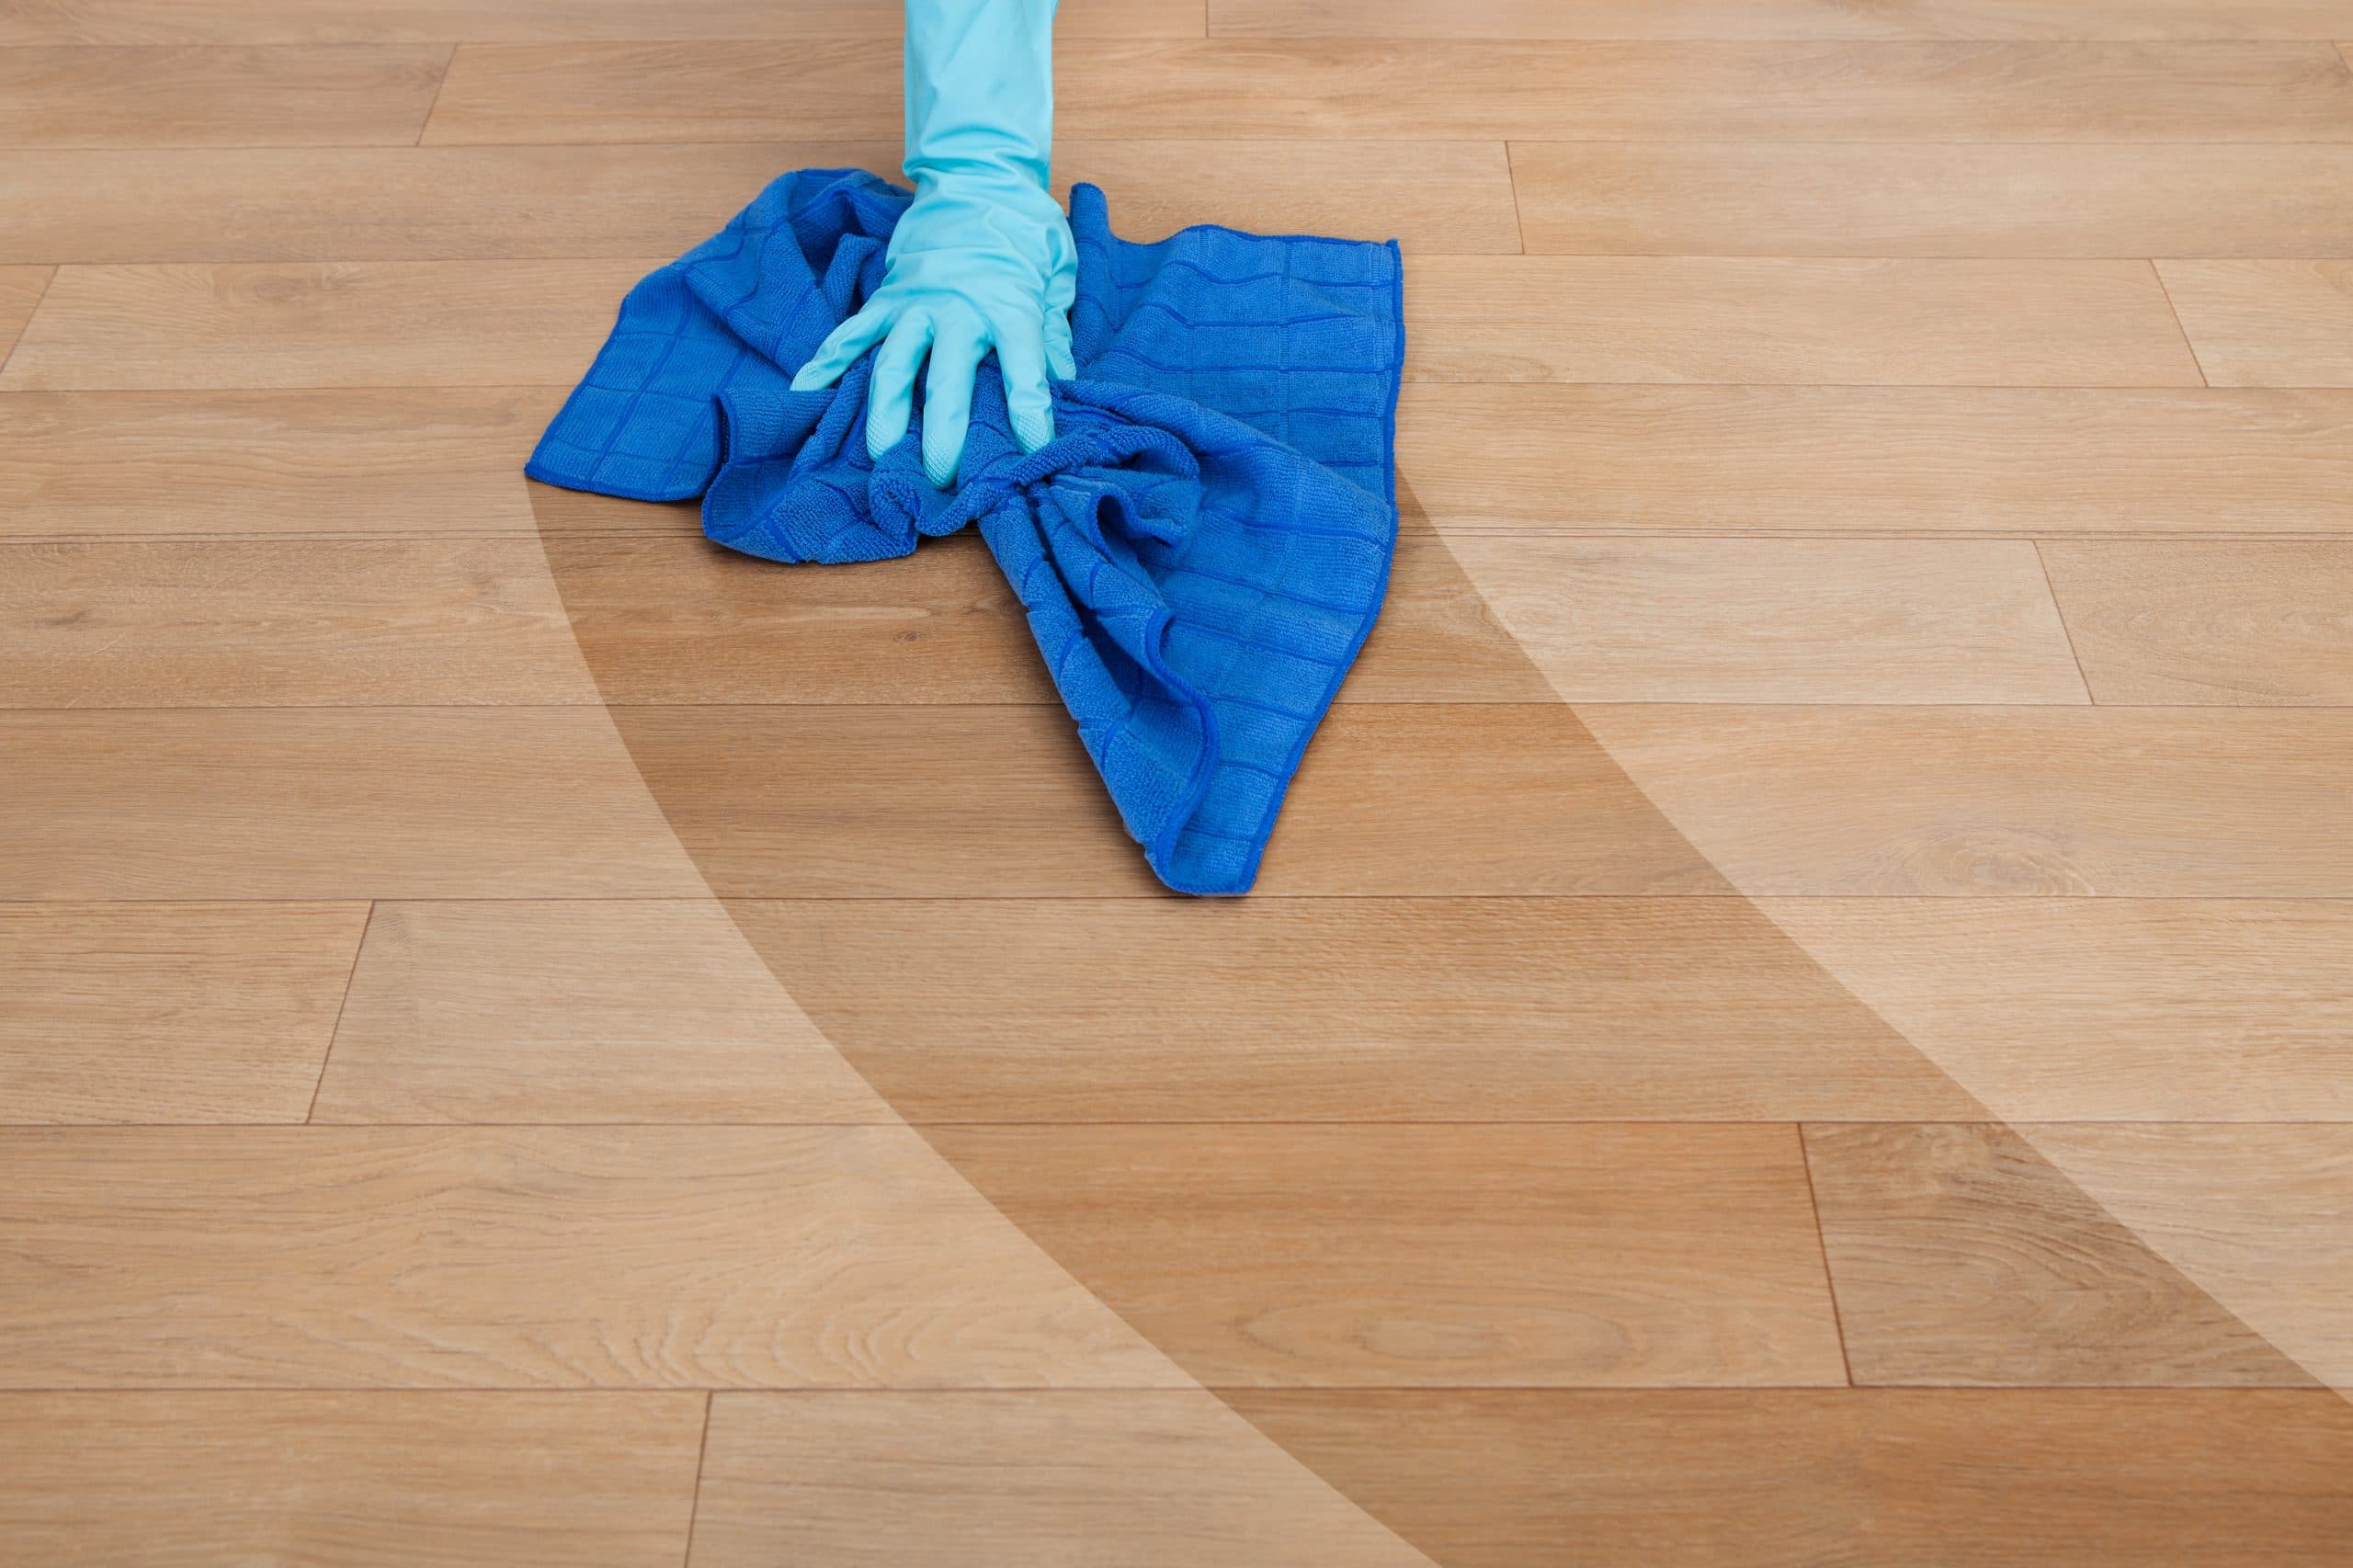 Dry cleaning a hardwood floor with a cloth